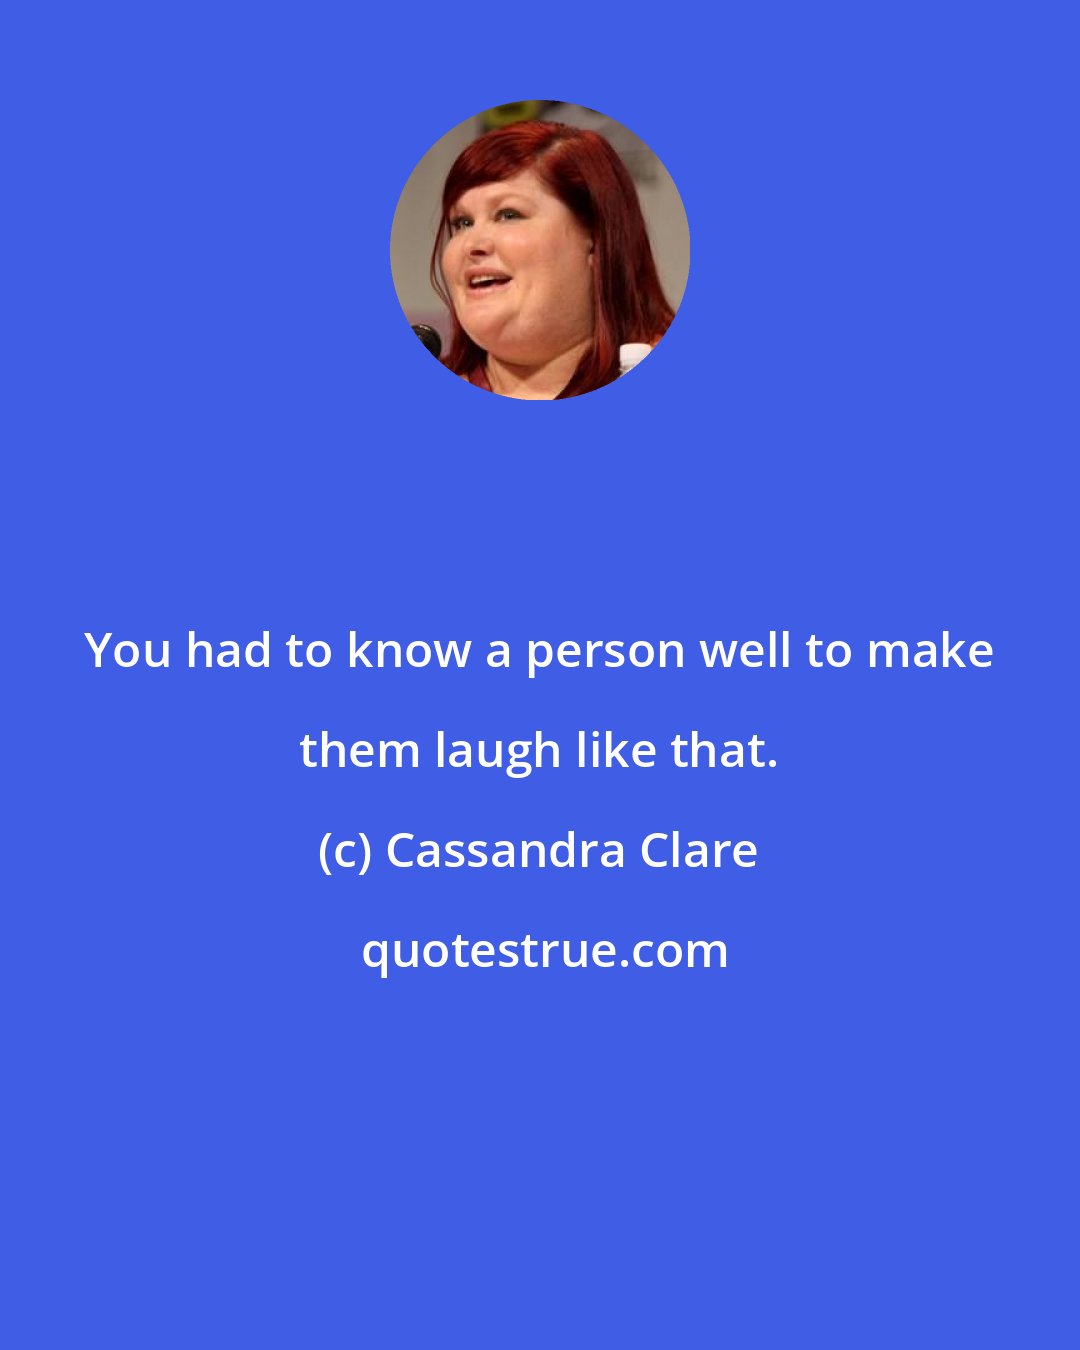 Cassandra Clare: You had to know a person well to make them laugh like that.